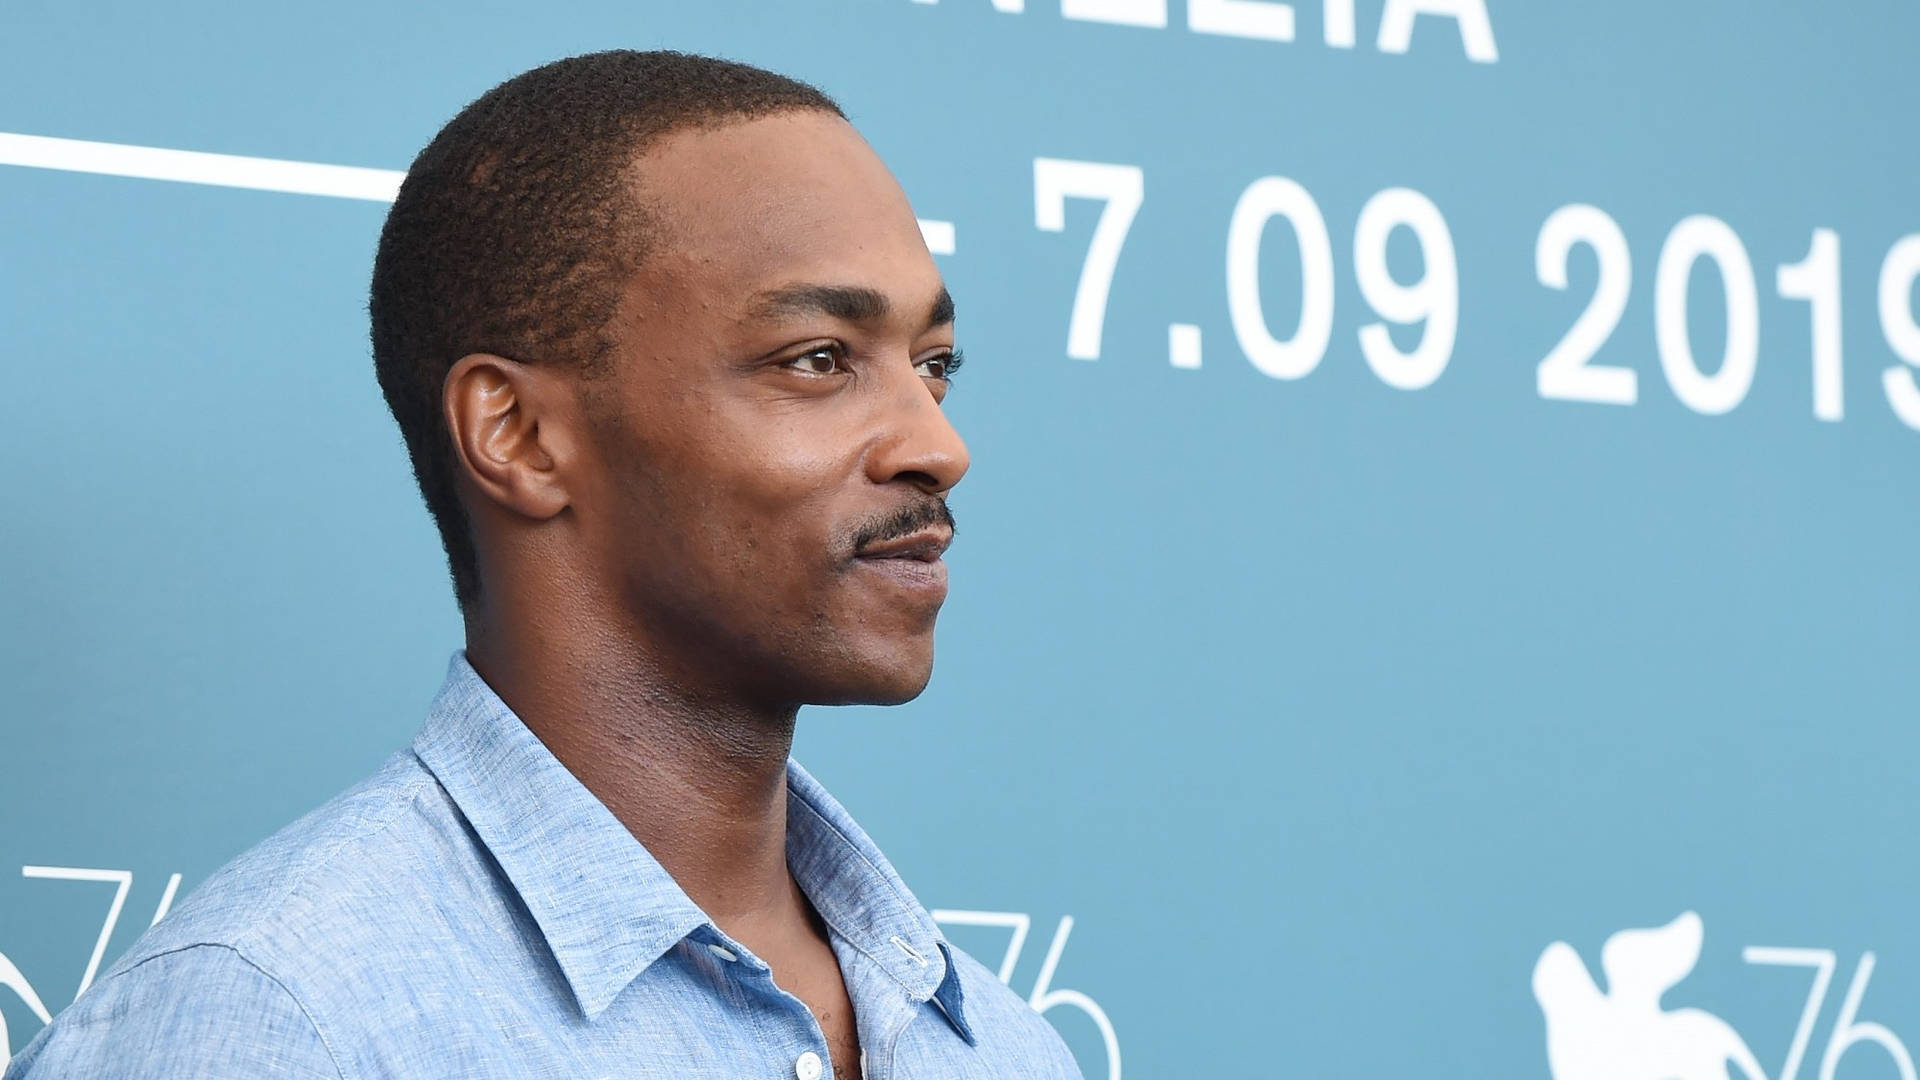 Anthony Mackie In Venice 2019 Background